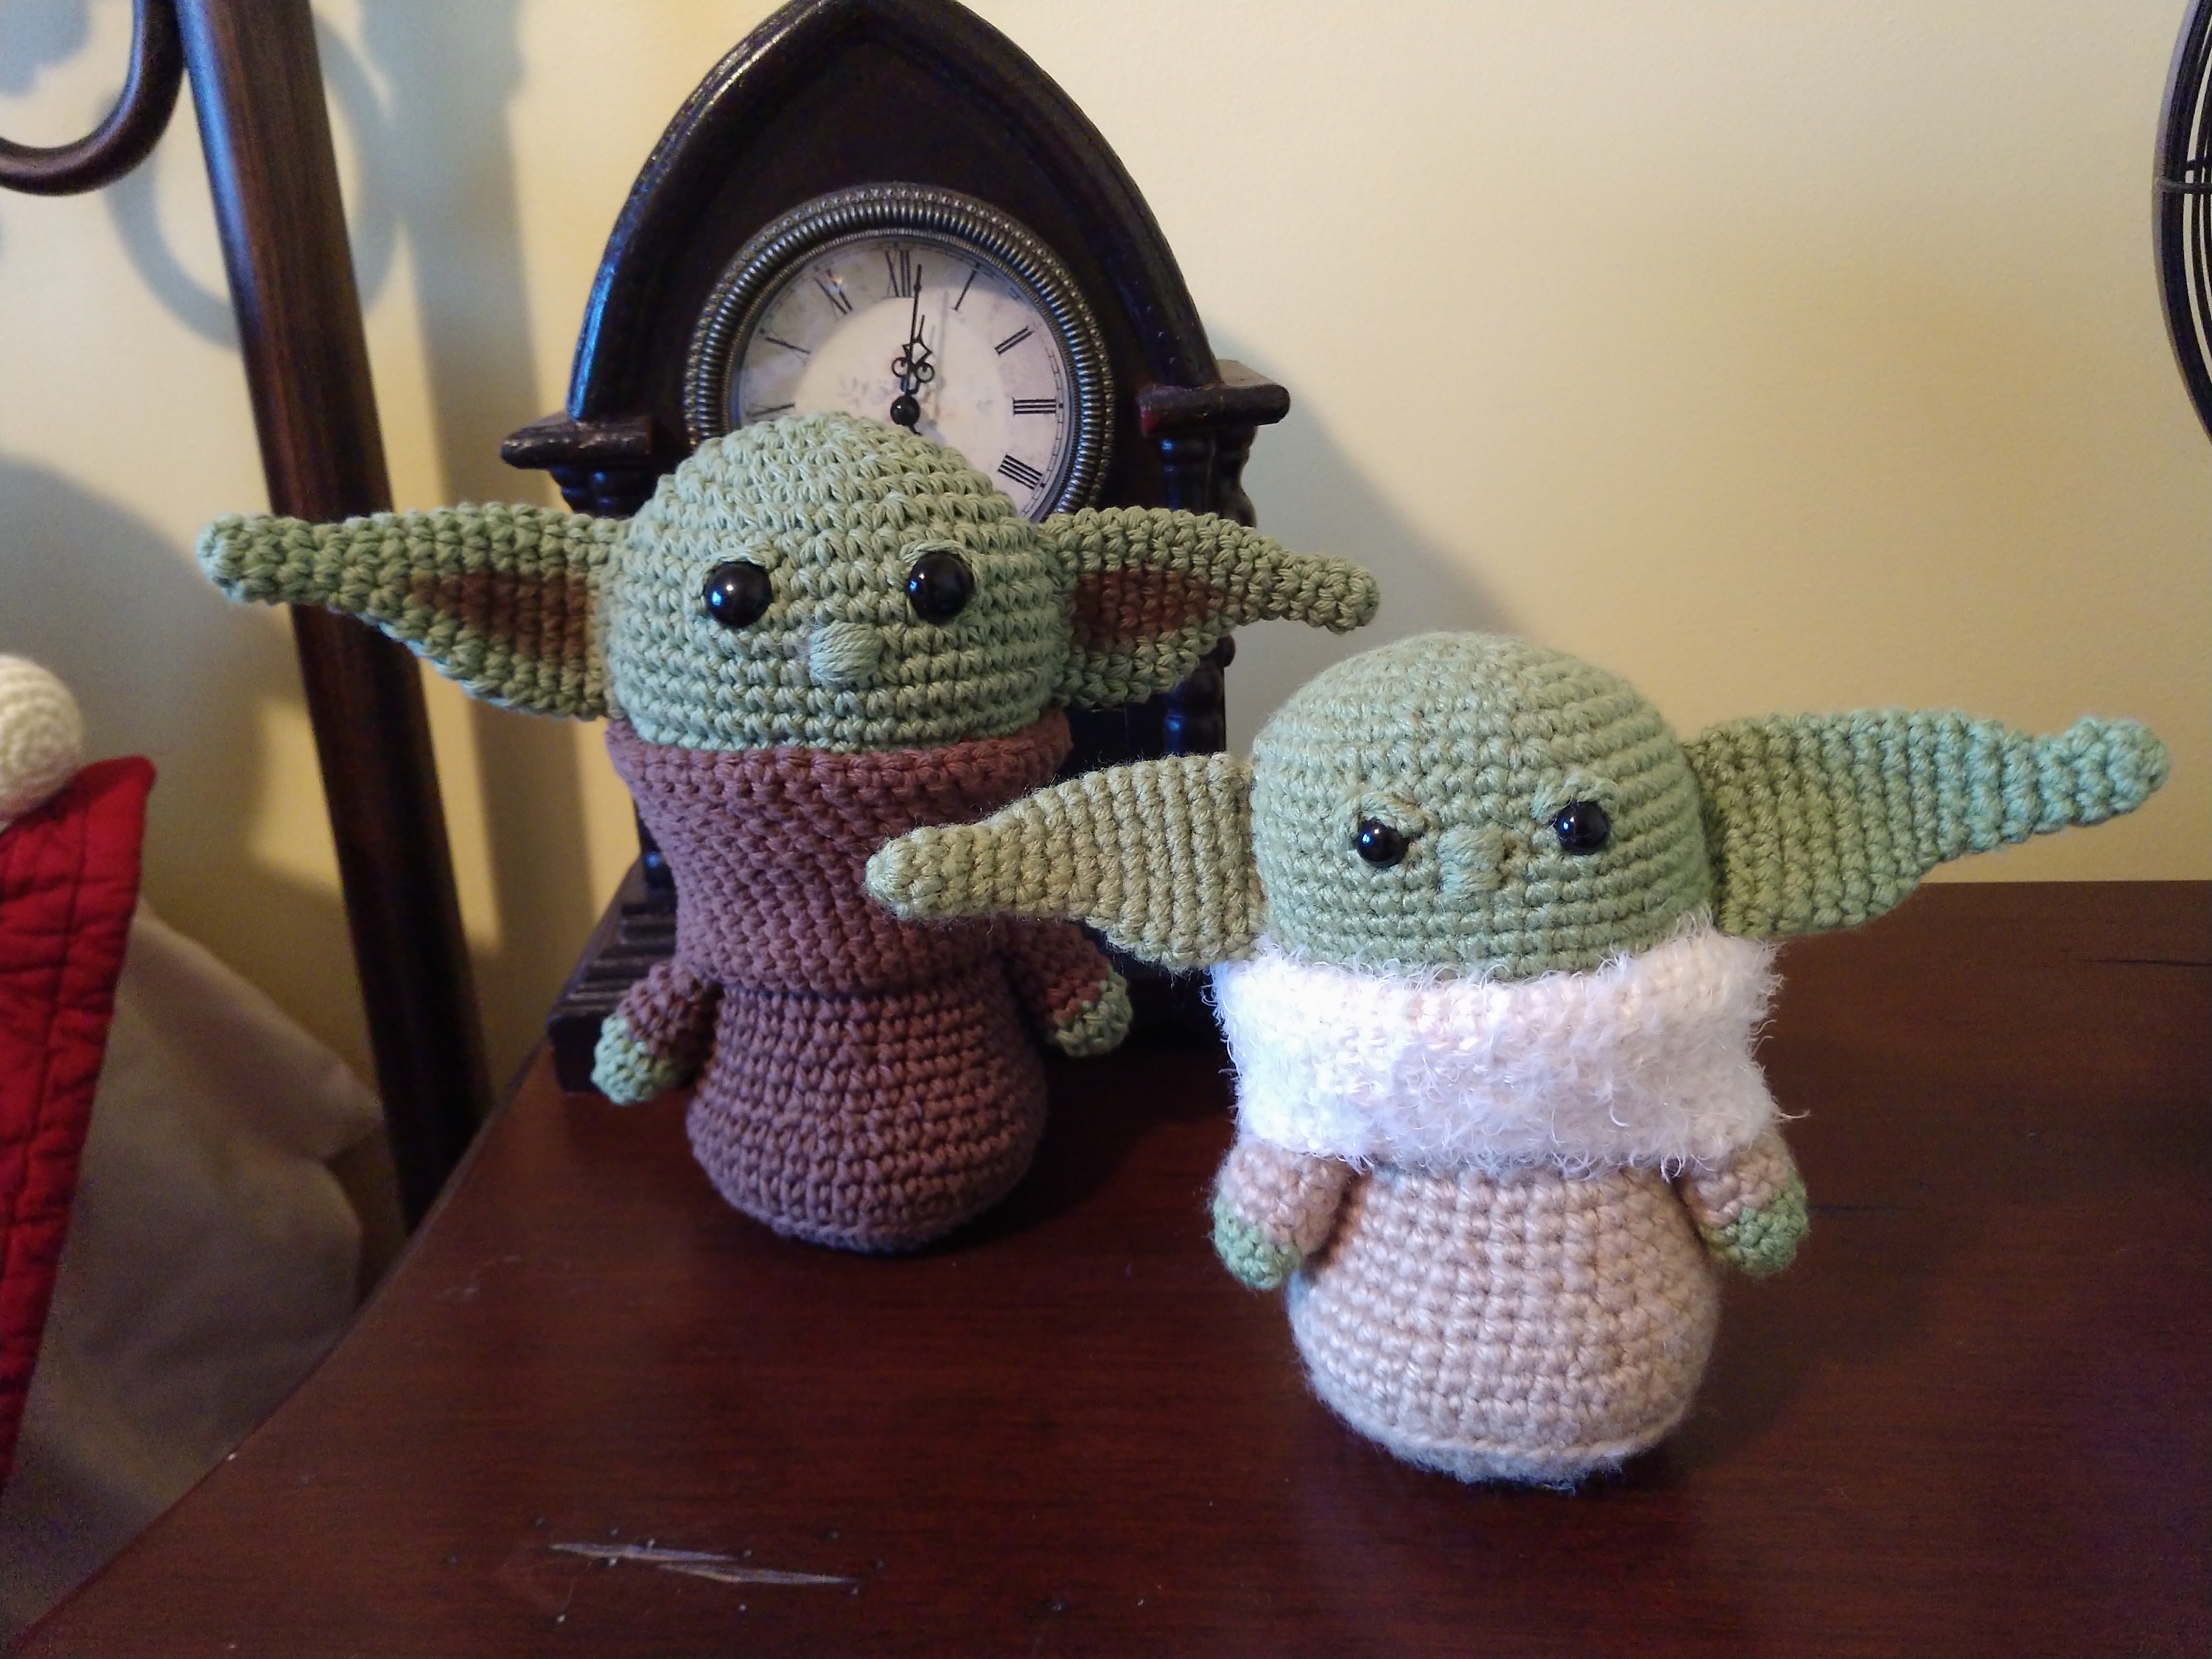 Great gifts for the kids.. See my crocheted stuffed animals.